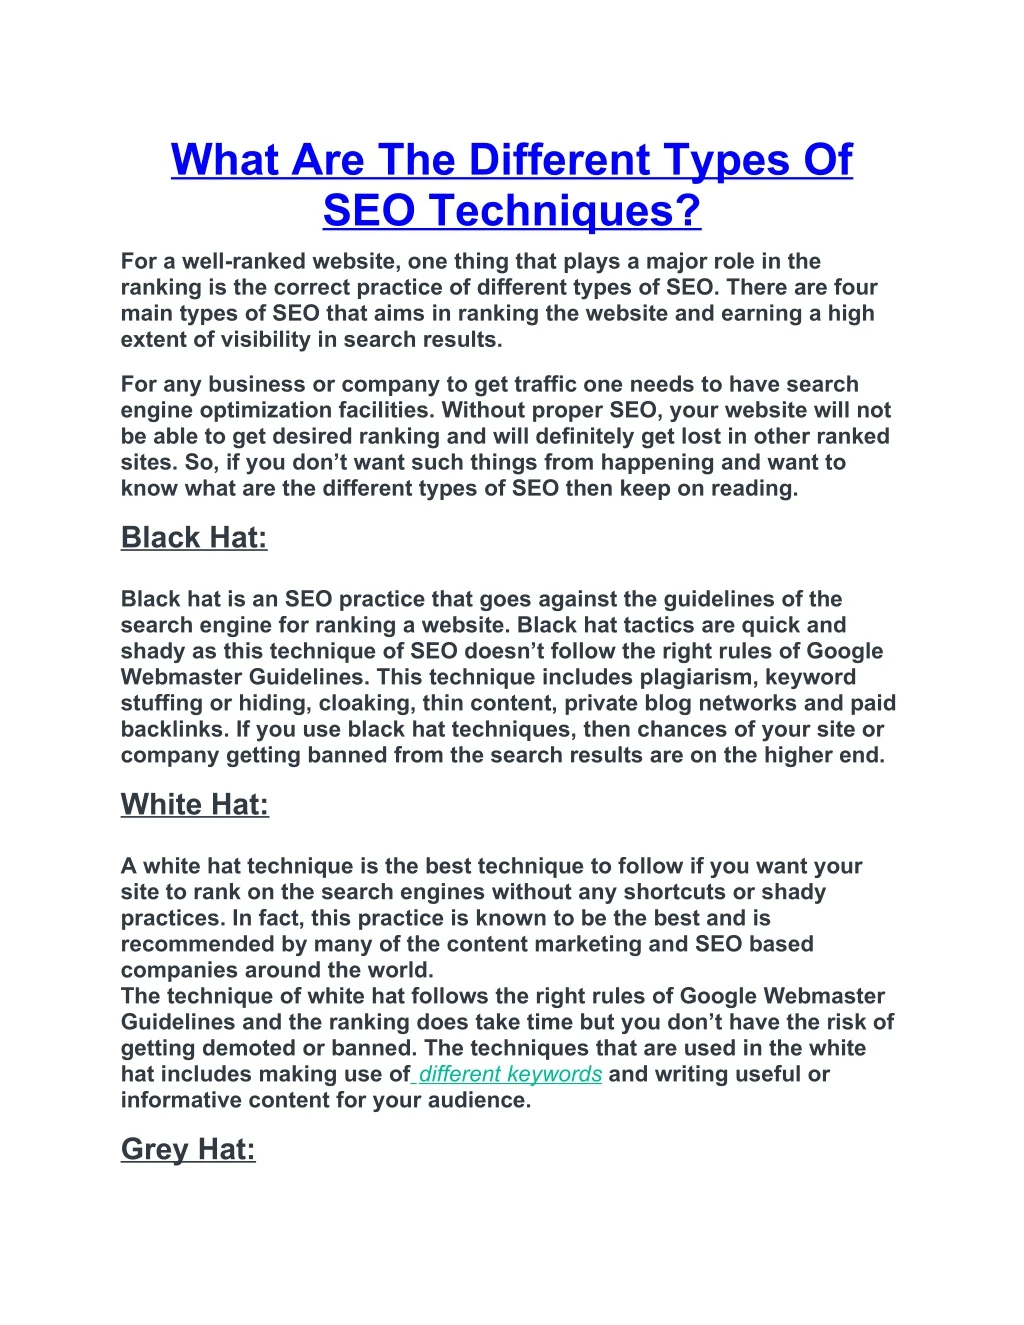 what are the different types of seo techniques